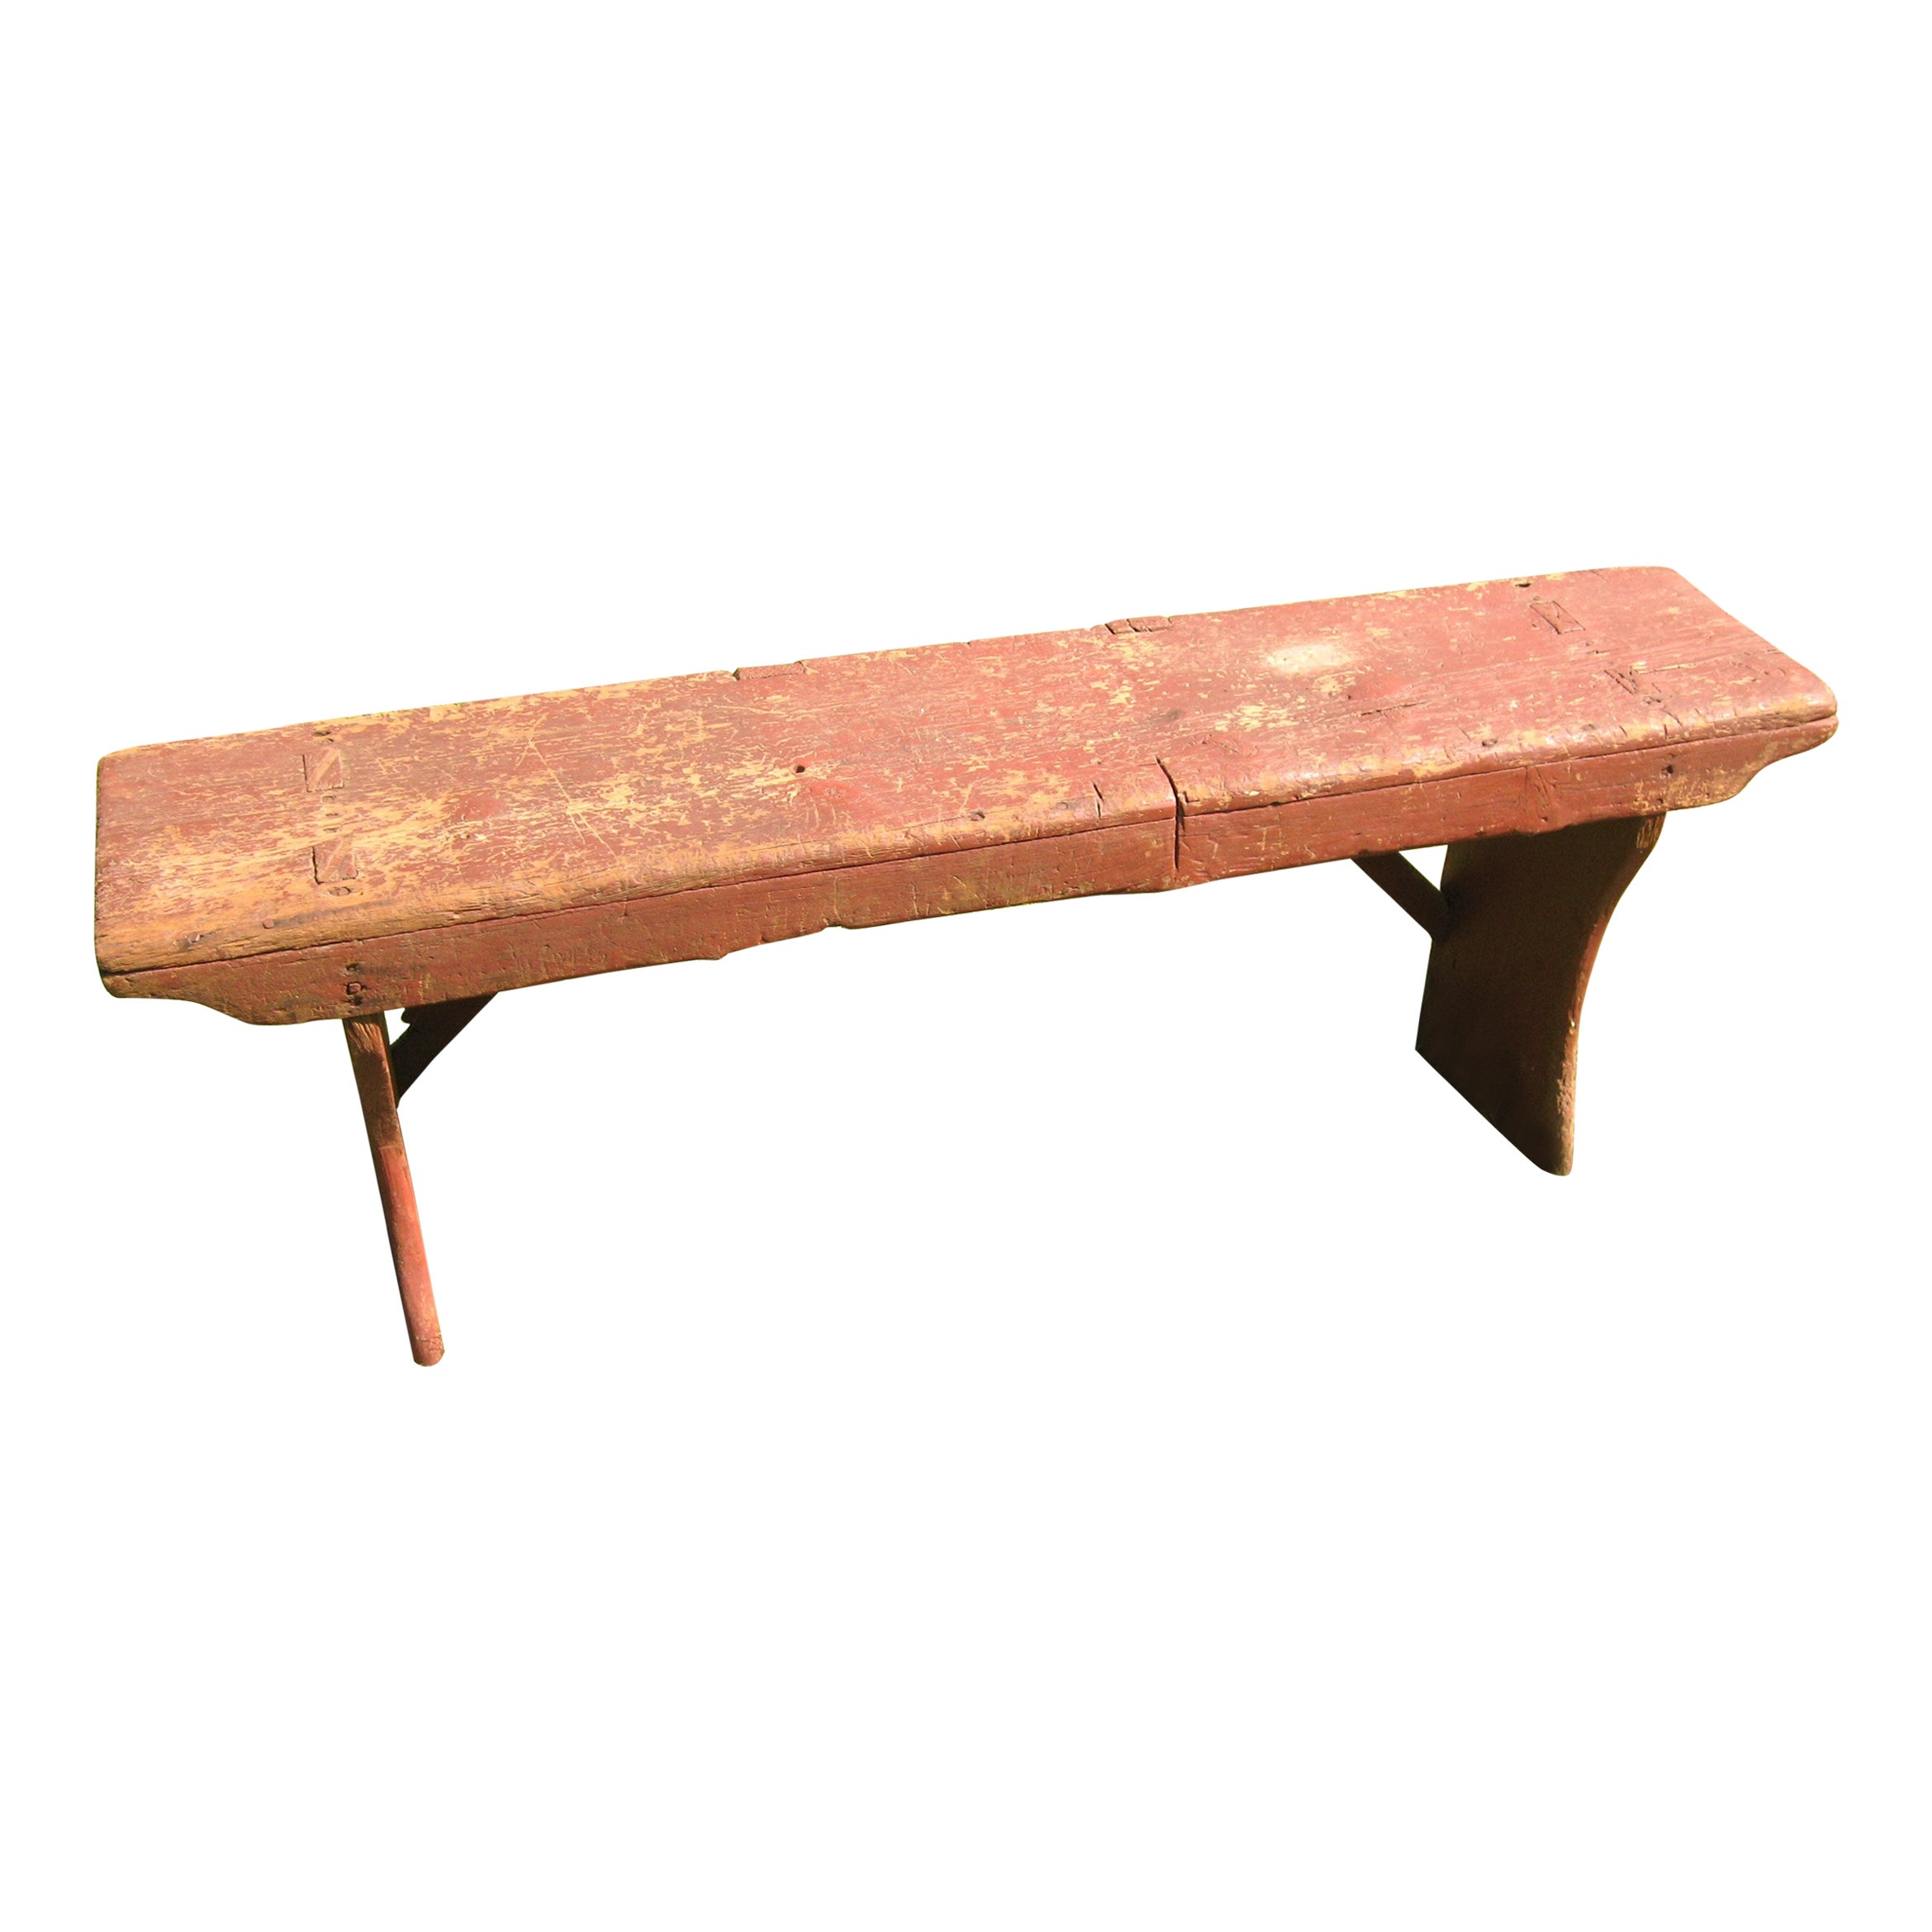 1920s Pine Bench in Great Original Barn Red Paint For Sale